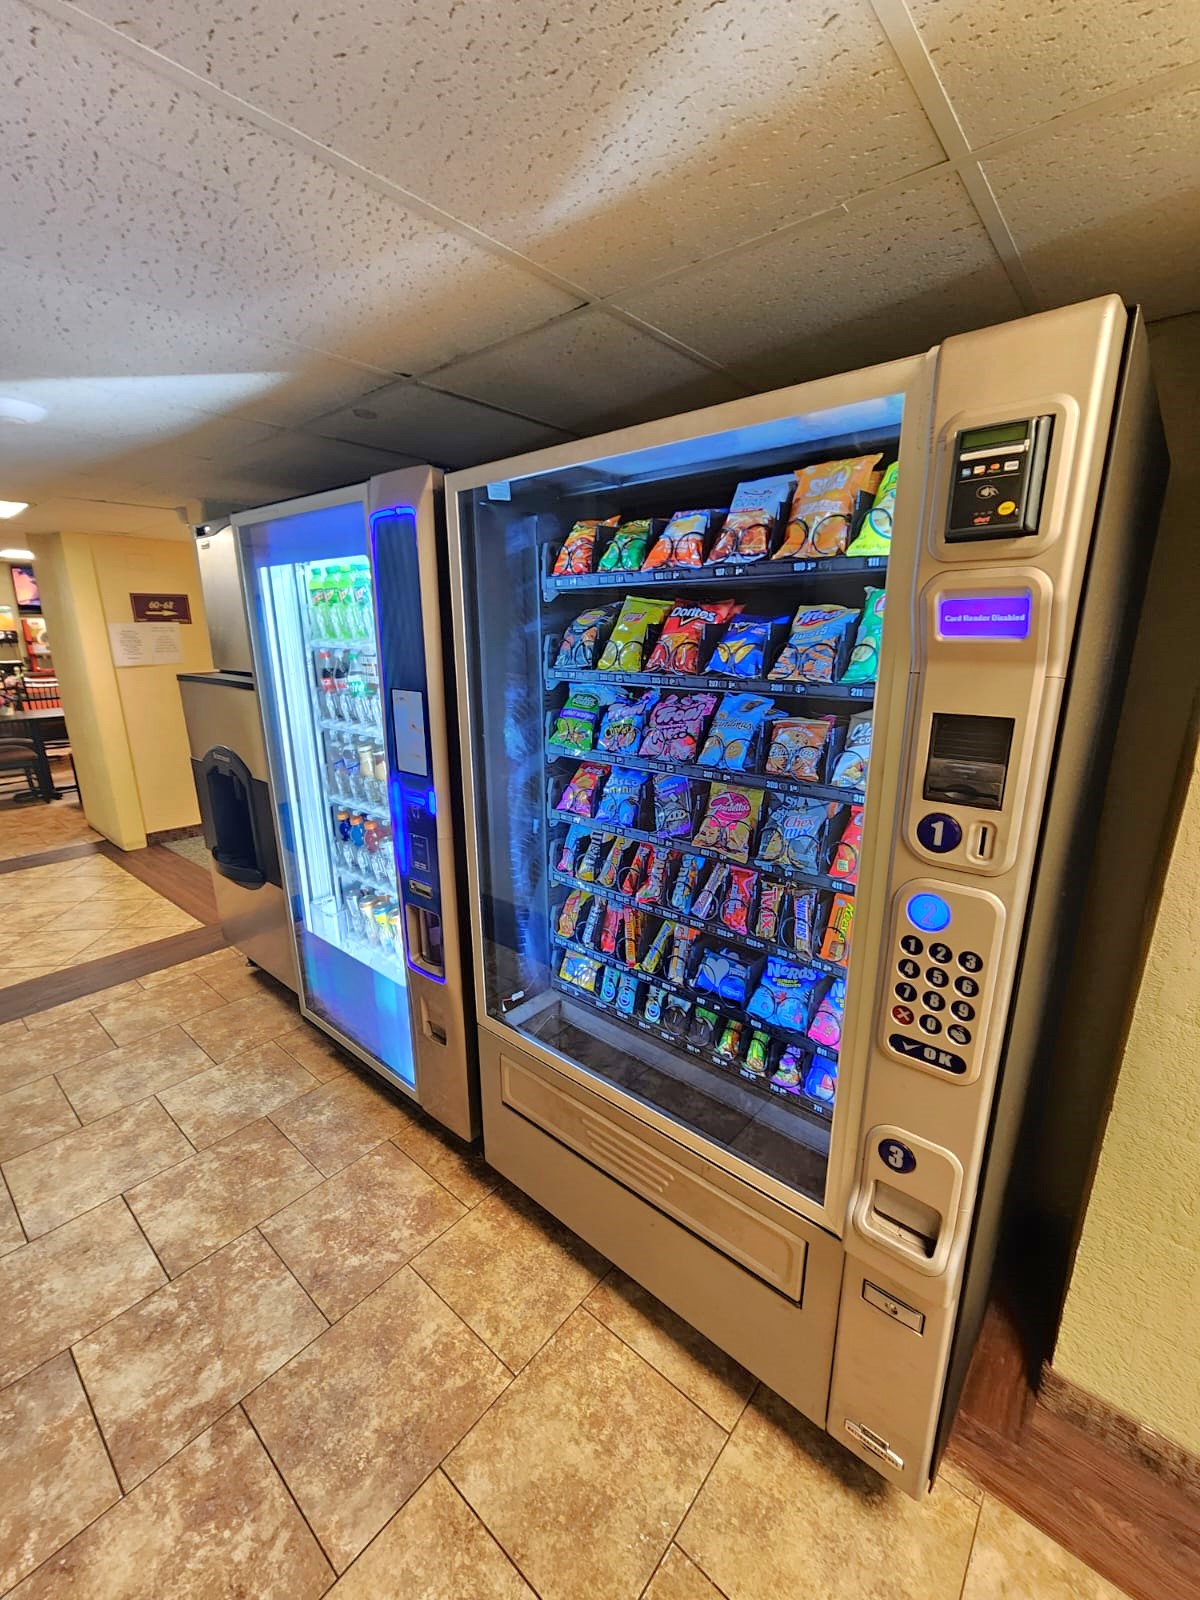 Vending machines for sodas, snacks and coffee